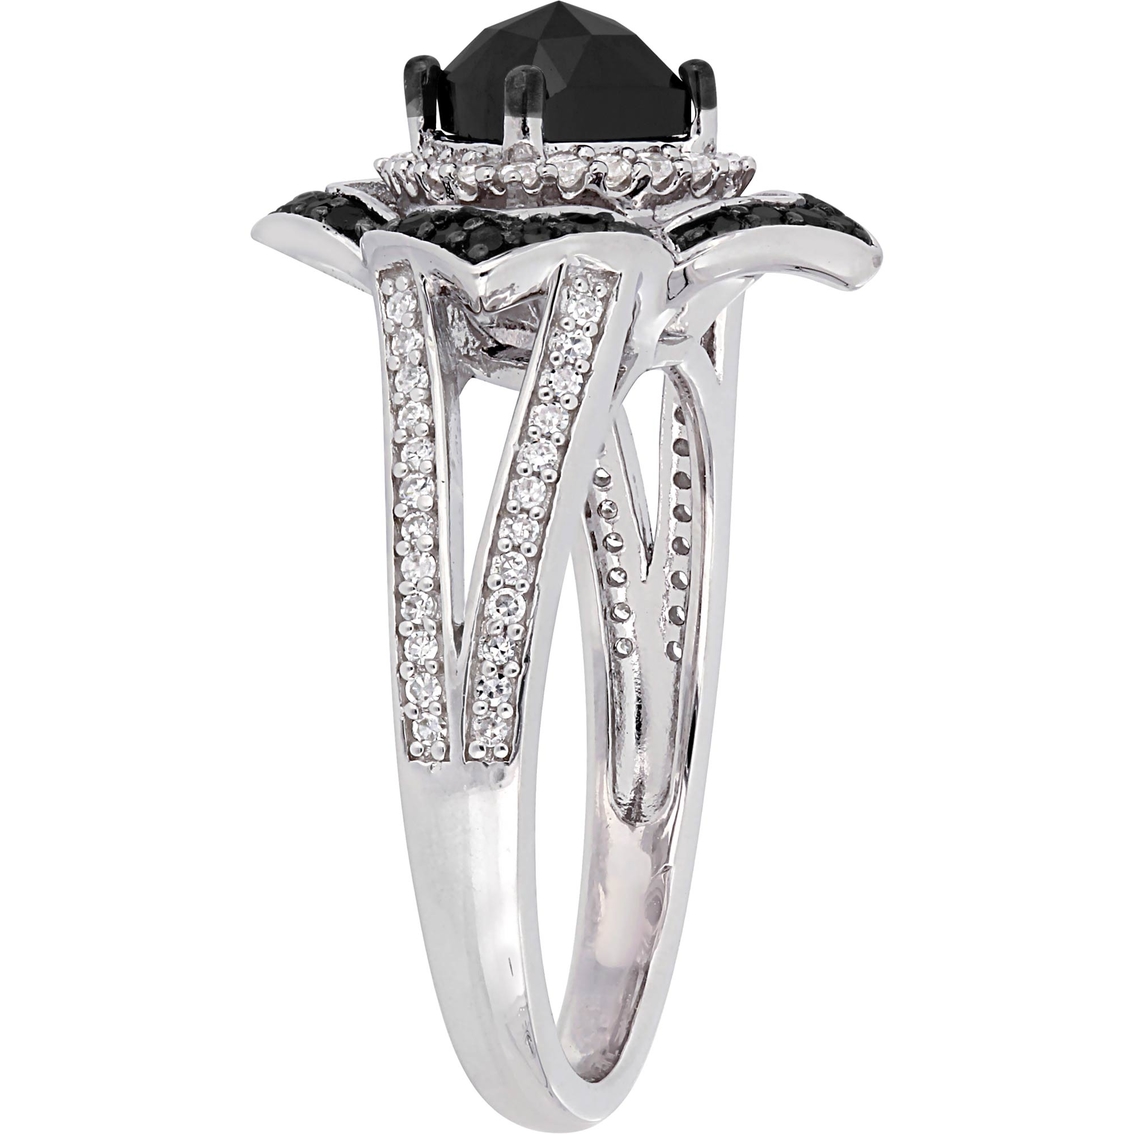 Diamore Sterling Silver 1 2/5 CTW Black and White Diamond Halo Ring - Image 2 of 4